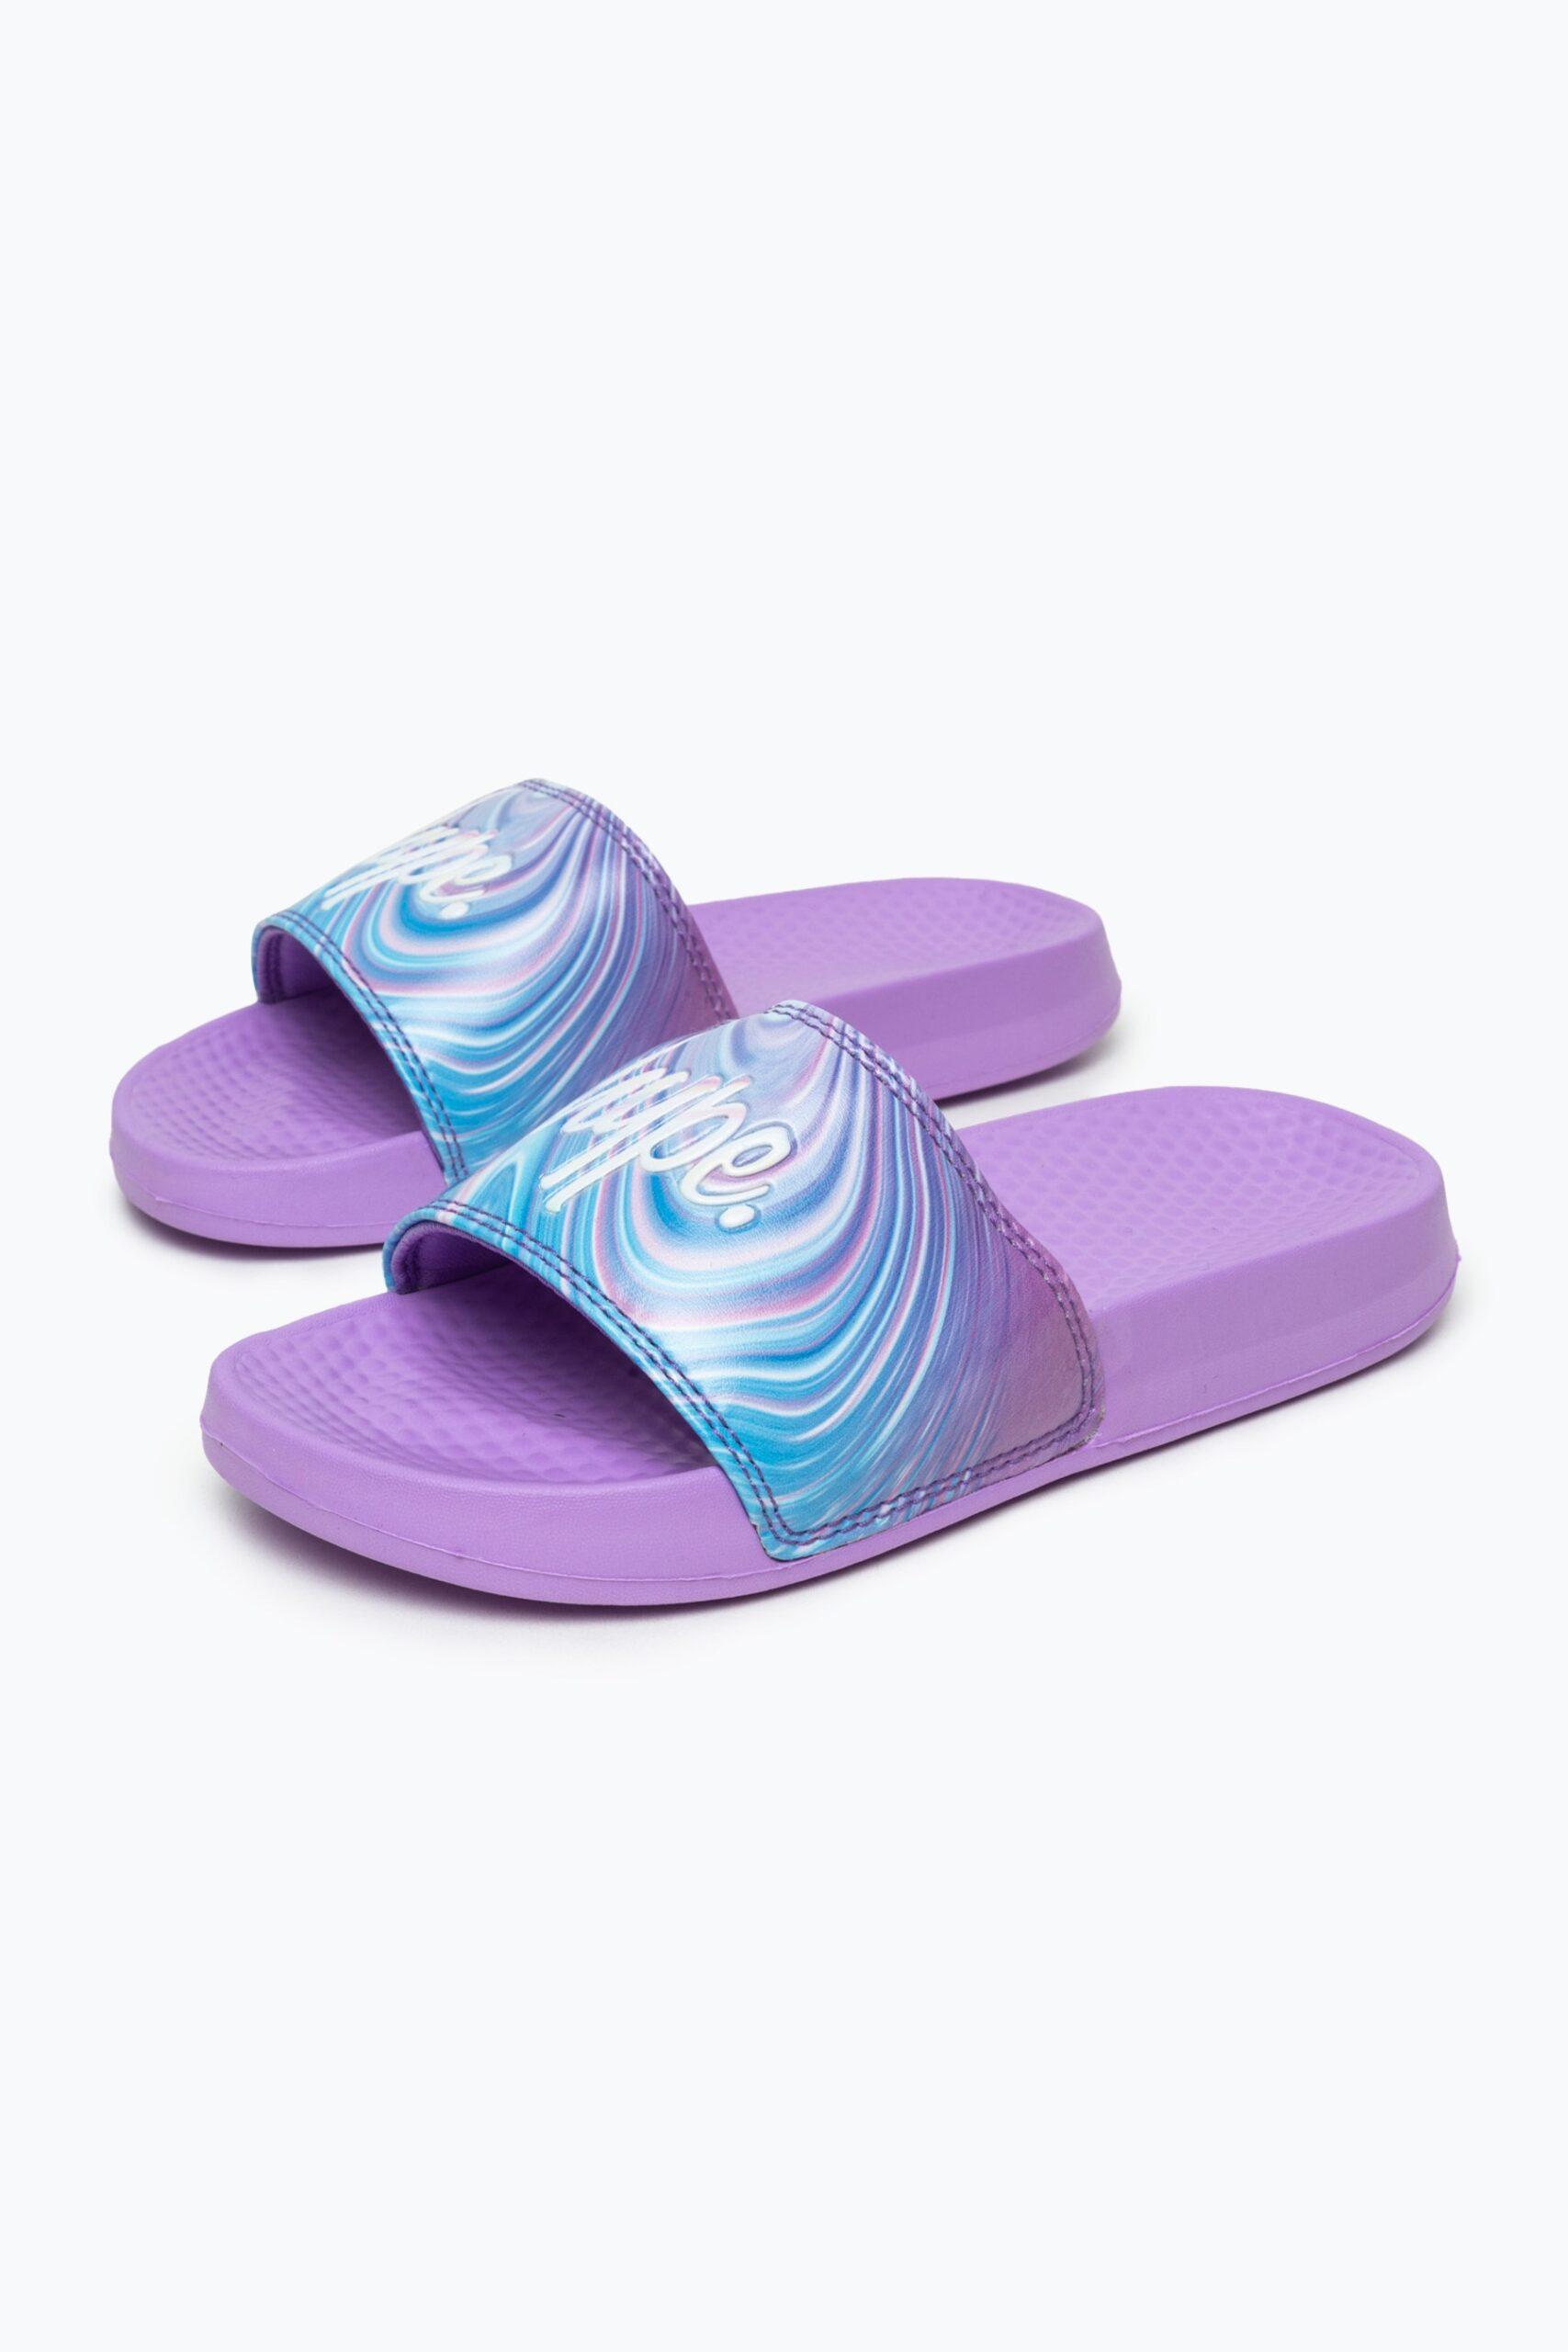 Hype pink and teal drip sliders side view